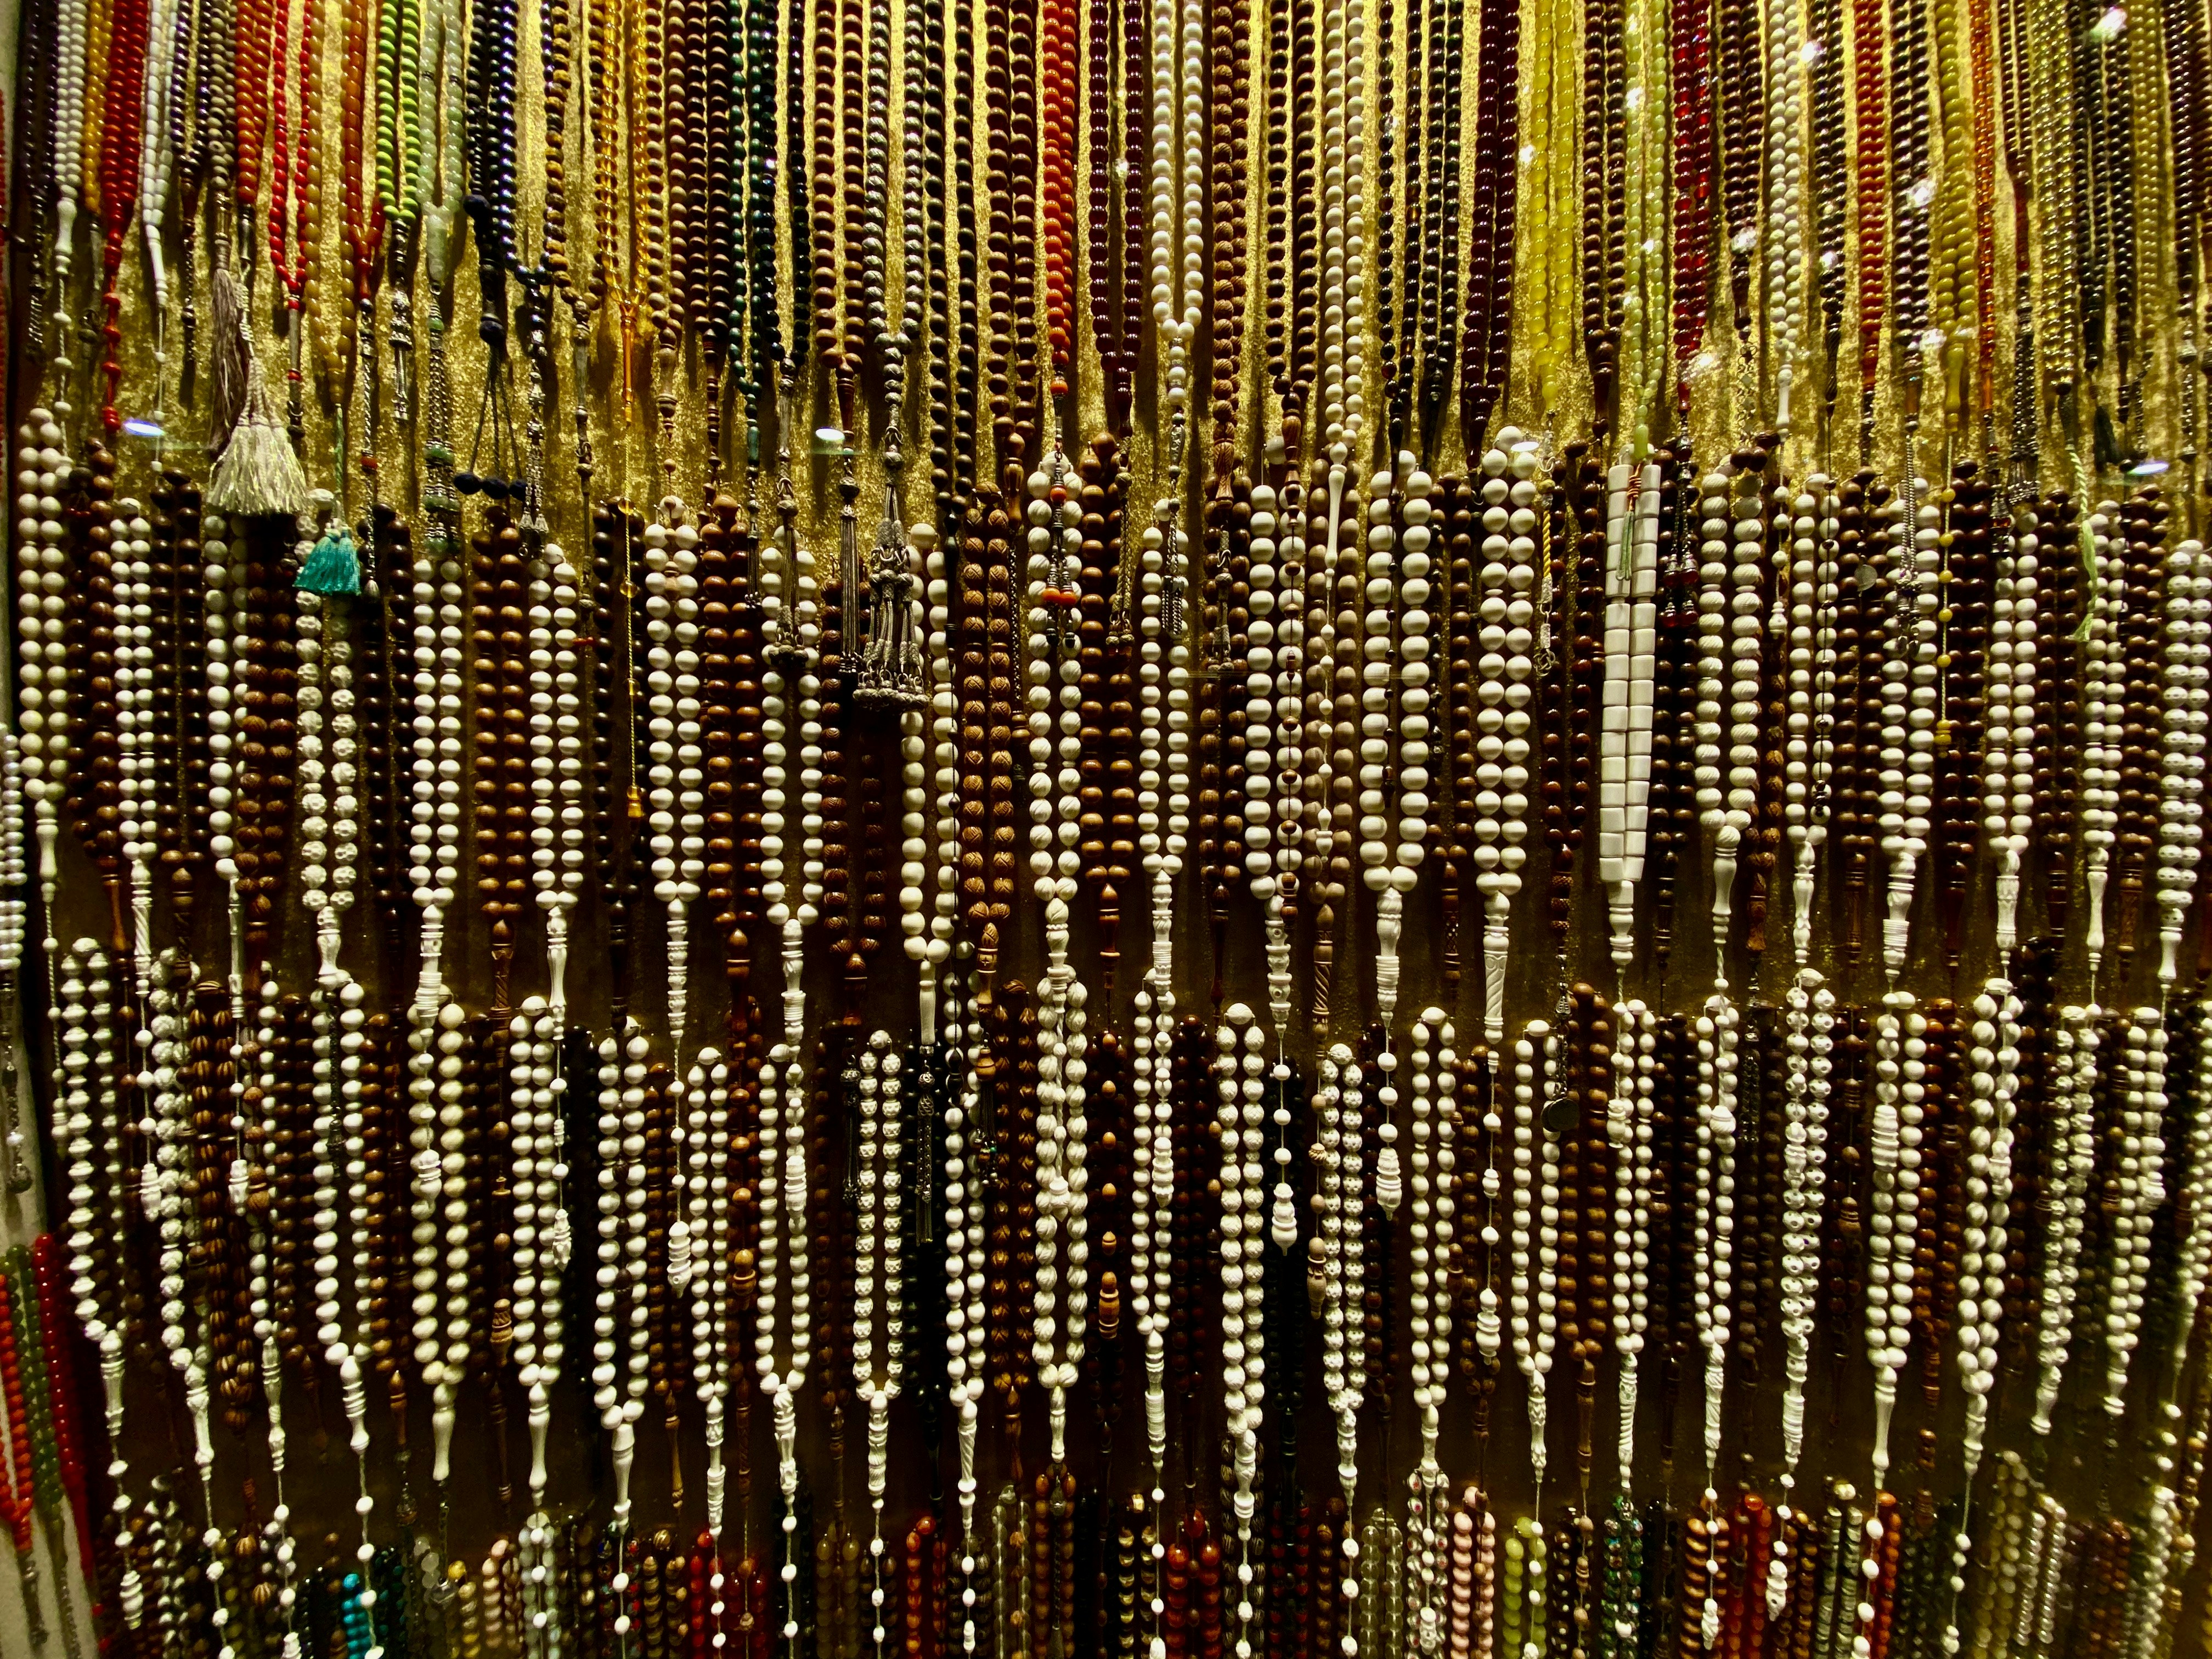 a display of beads and necklaces in a store